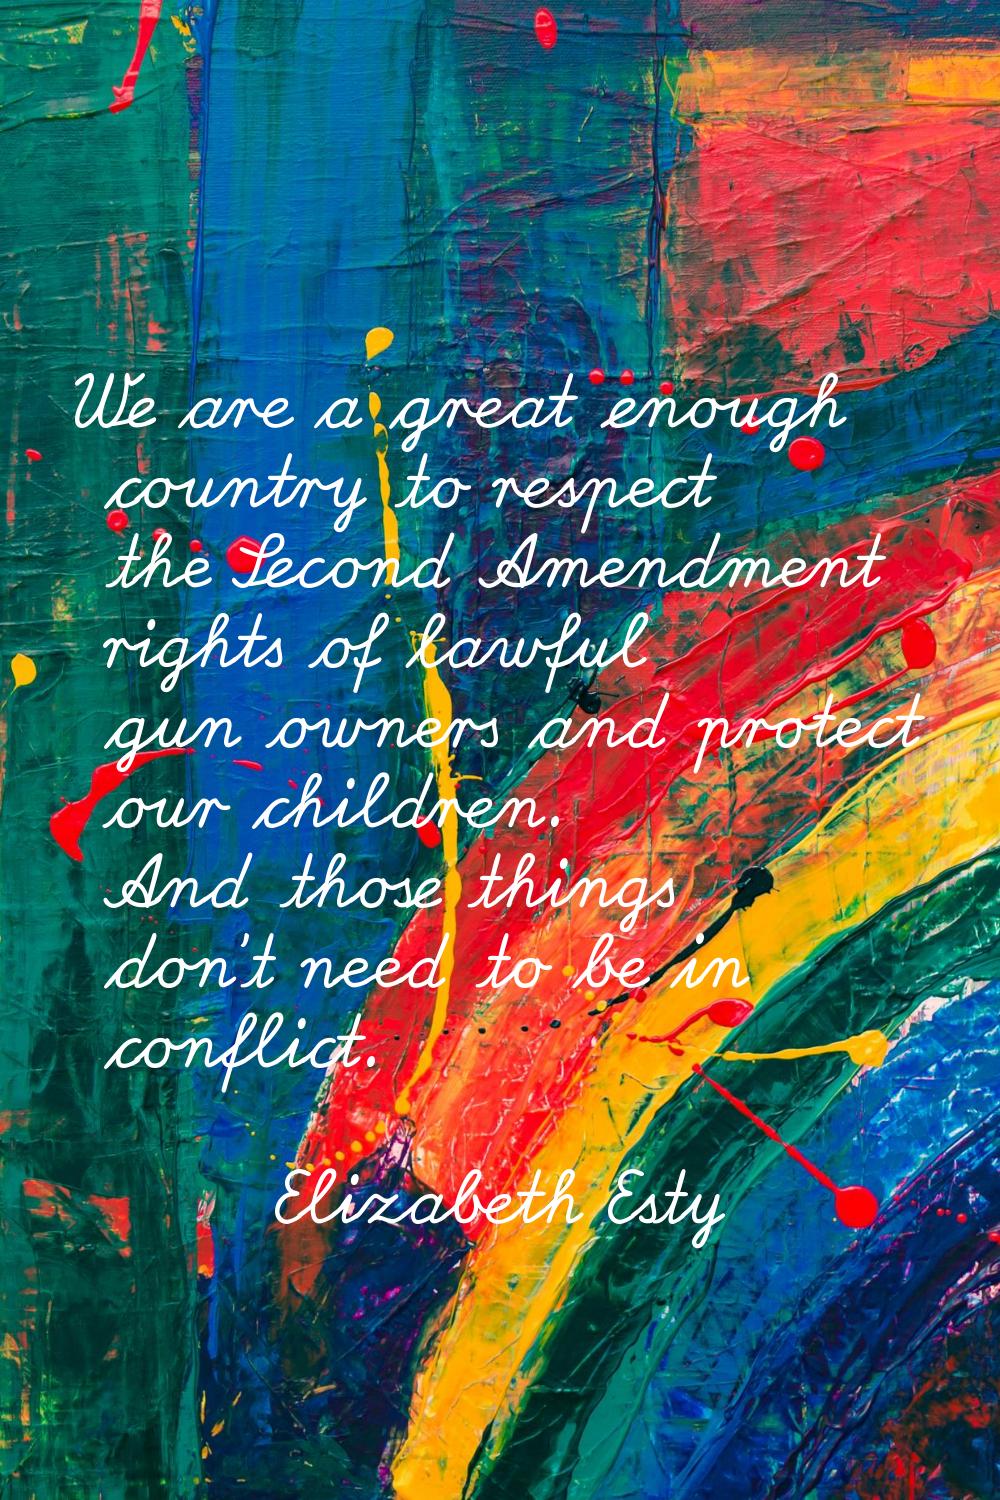 We are a great enough country to respect the Second Amendment rights of lawful gun owners and prote